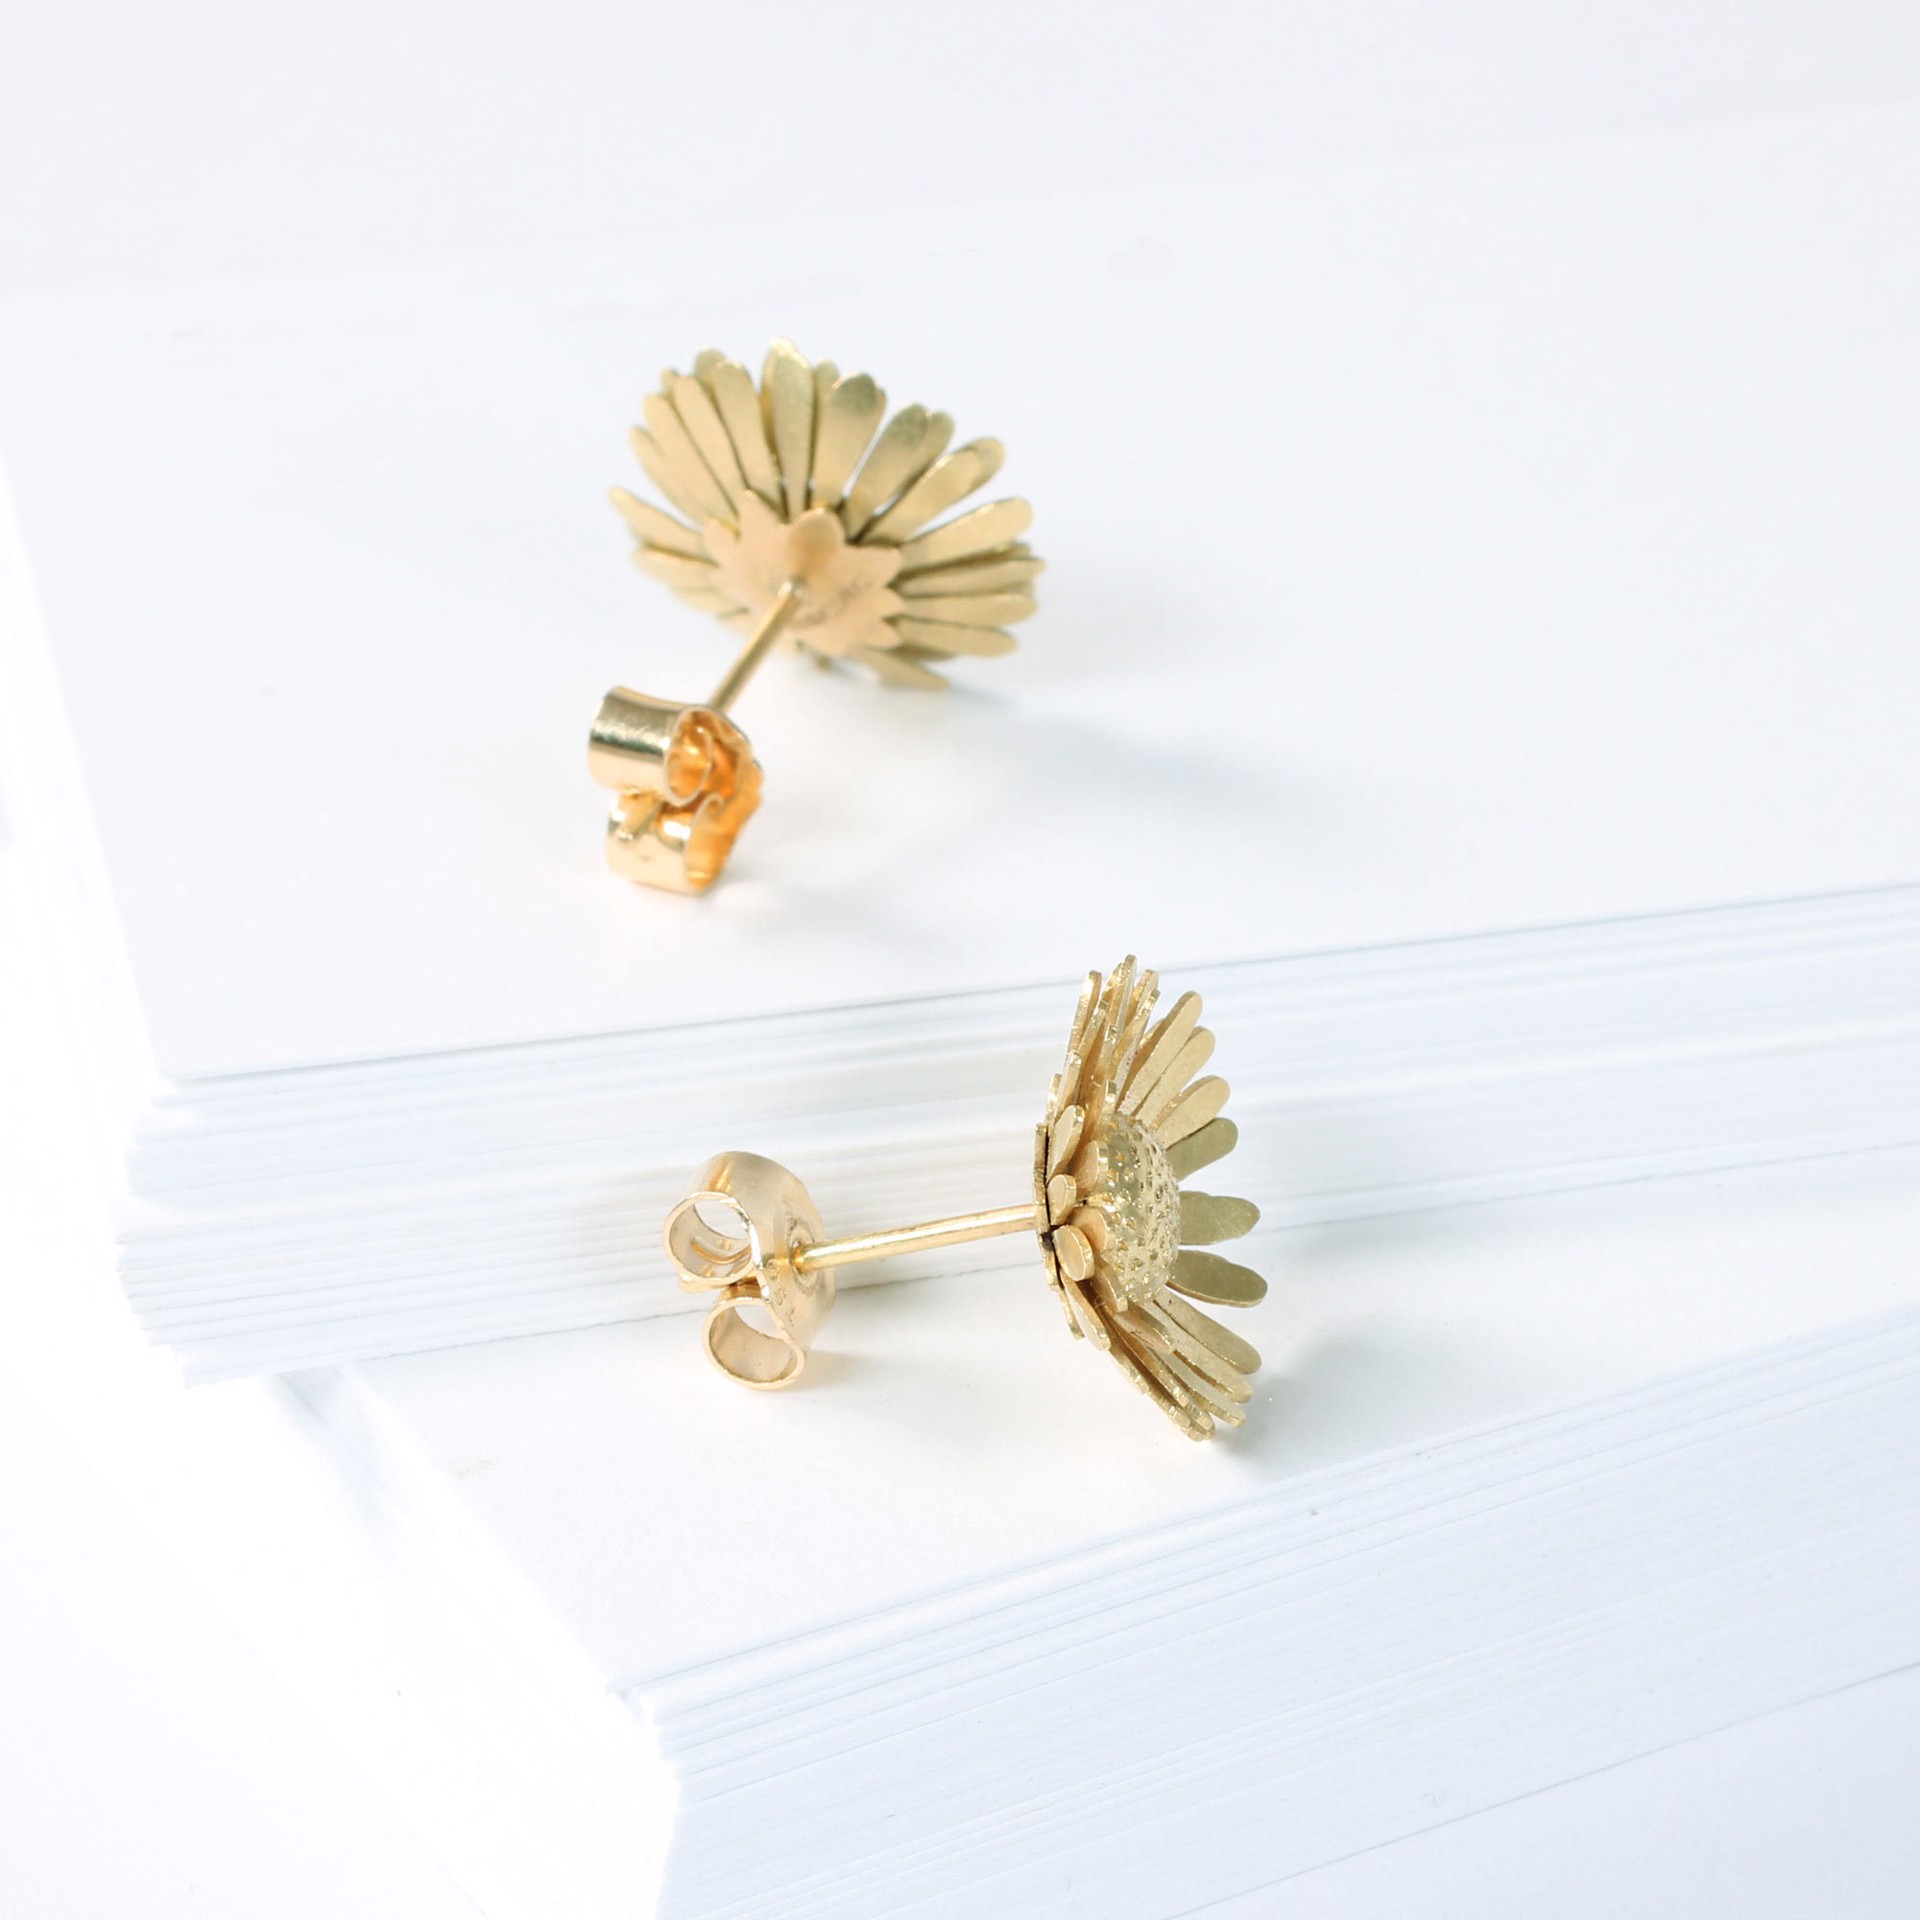 Golden Daisy Earrings by Christopher Thompson-Royds